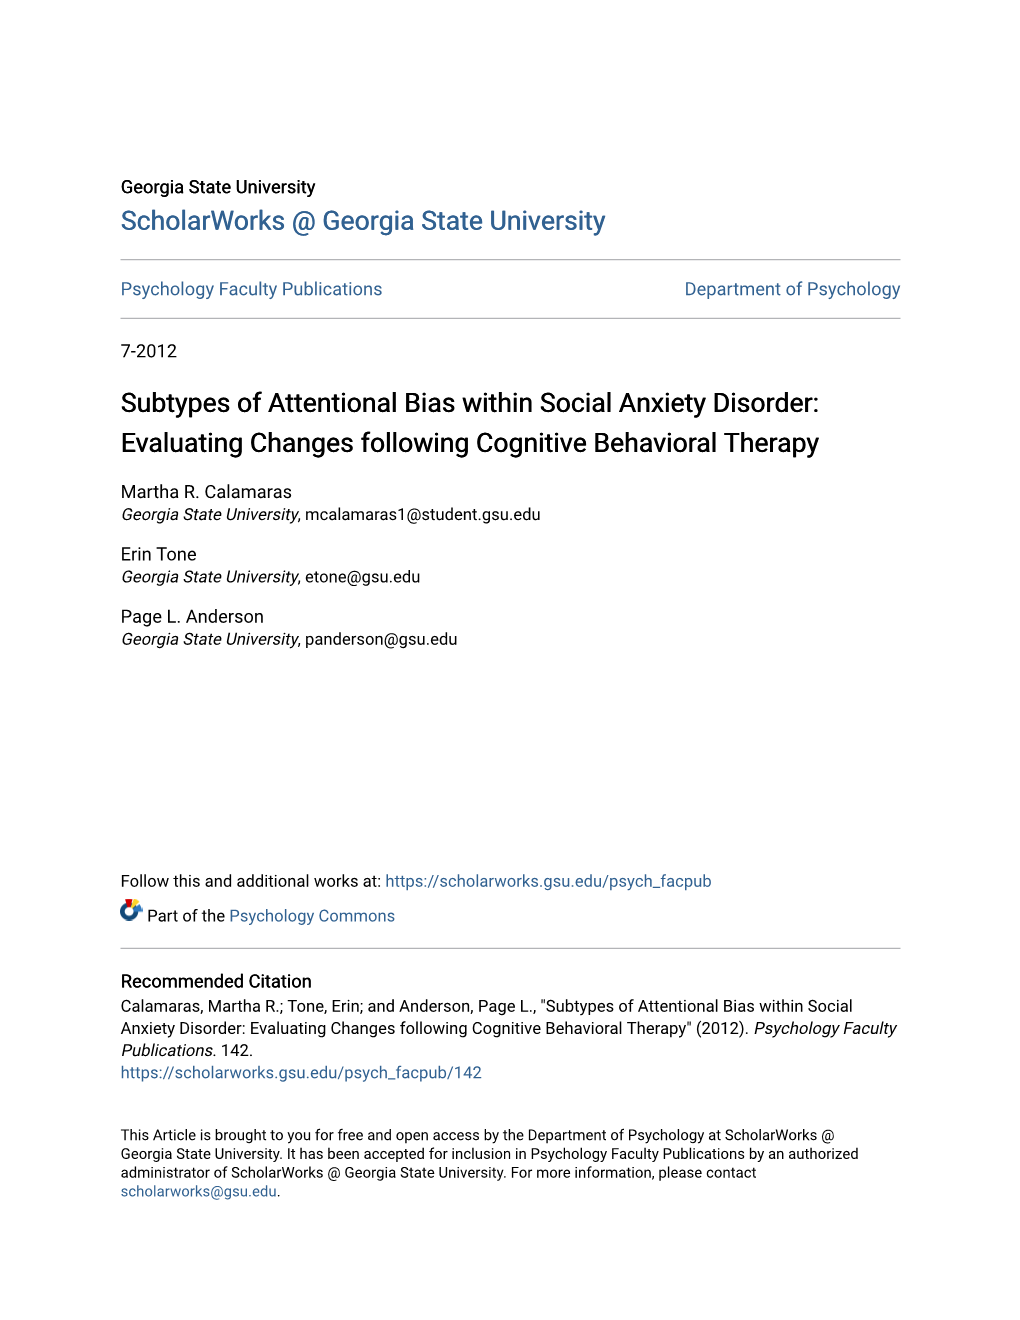 Subtypes of Attentional Bias Within Social Anxiety Disorder: Evaluating Changes Following Cognitive Behavioral Therapy